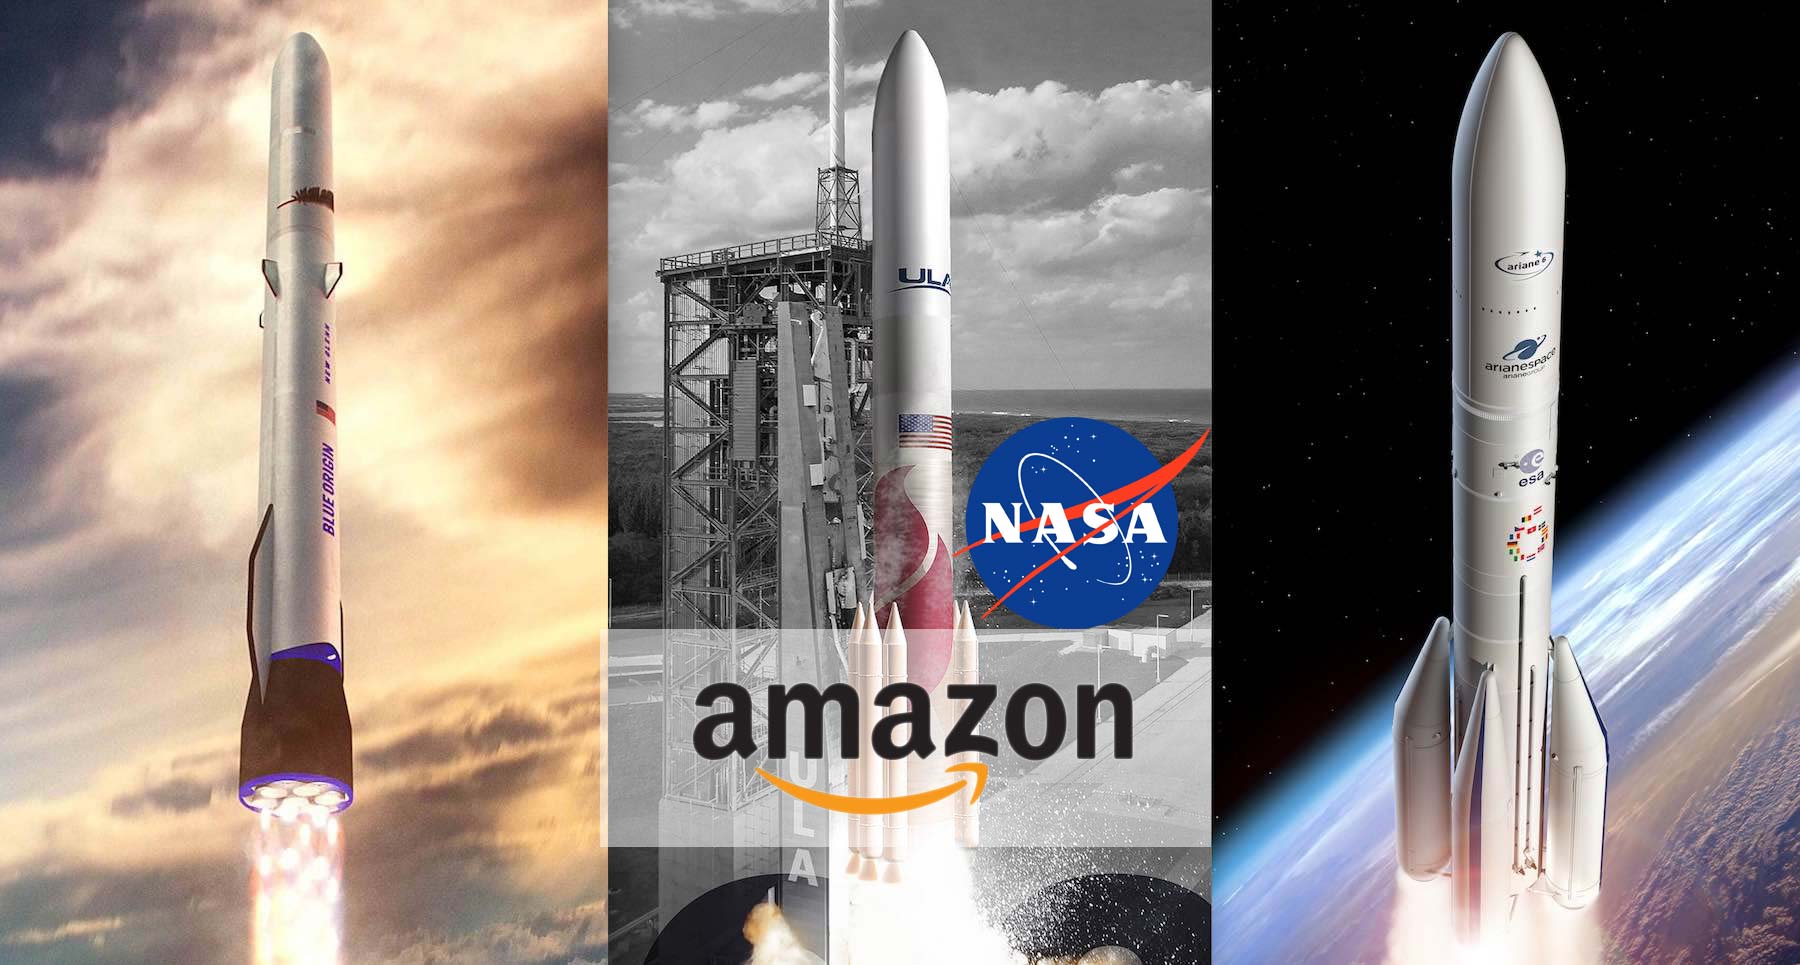 Amazon is building a $120 million processing facility at the NASA Space Center